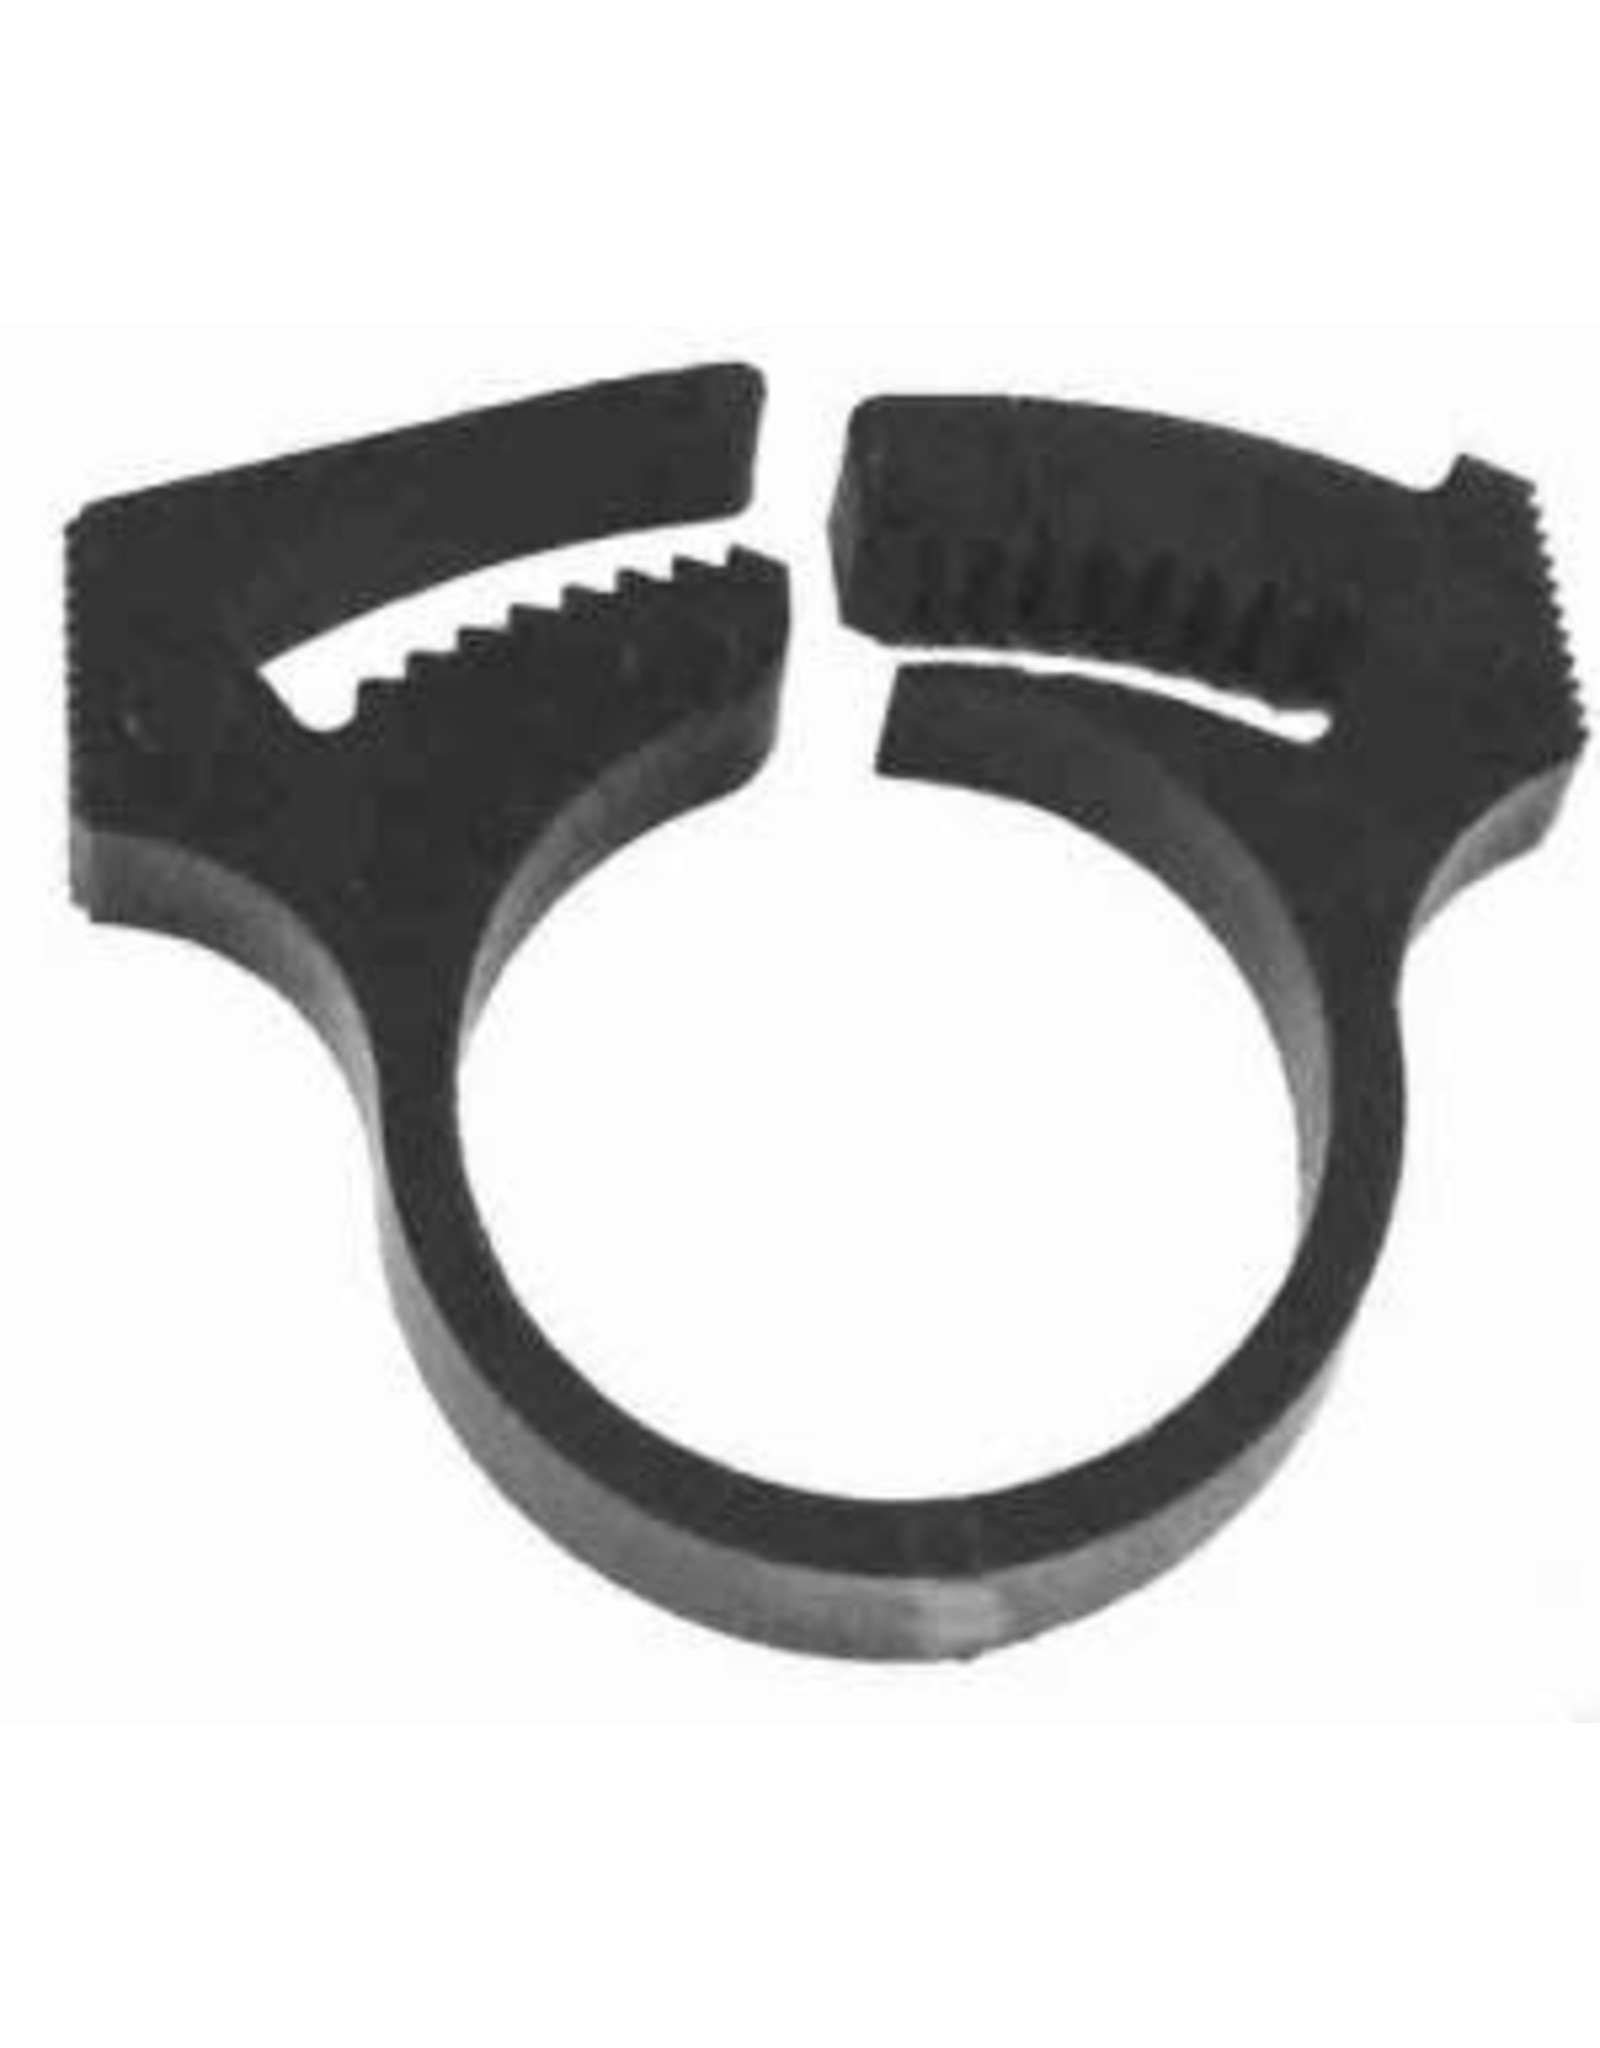 KWICK CLAMP FOR 3/8" HOSE BLACK 2 PACK